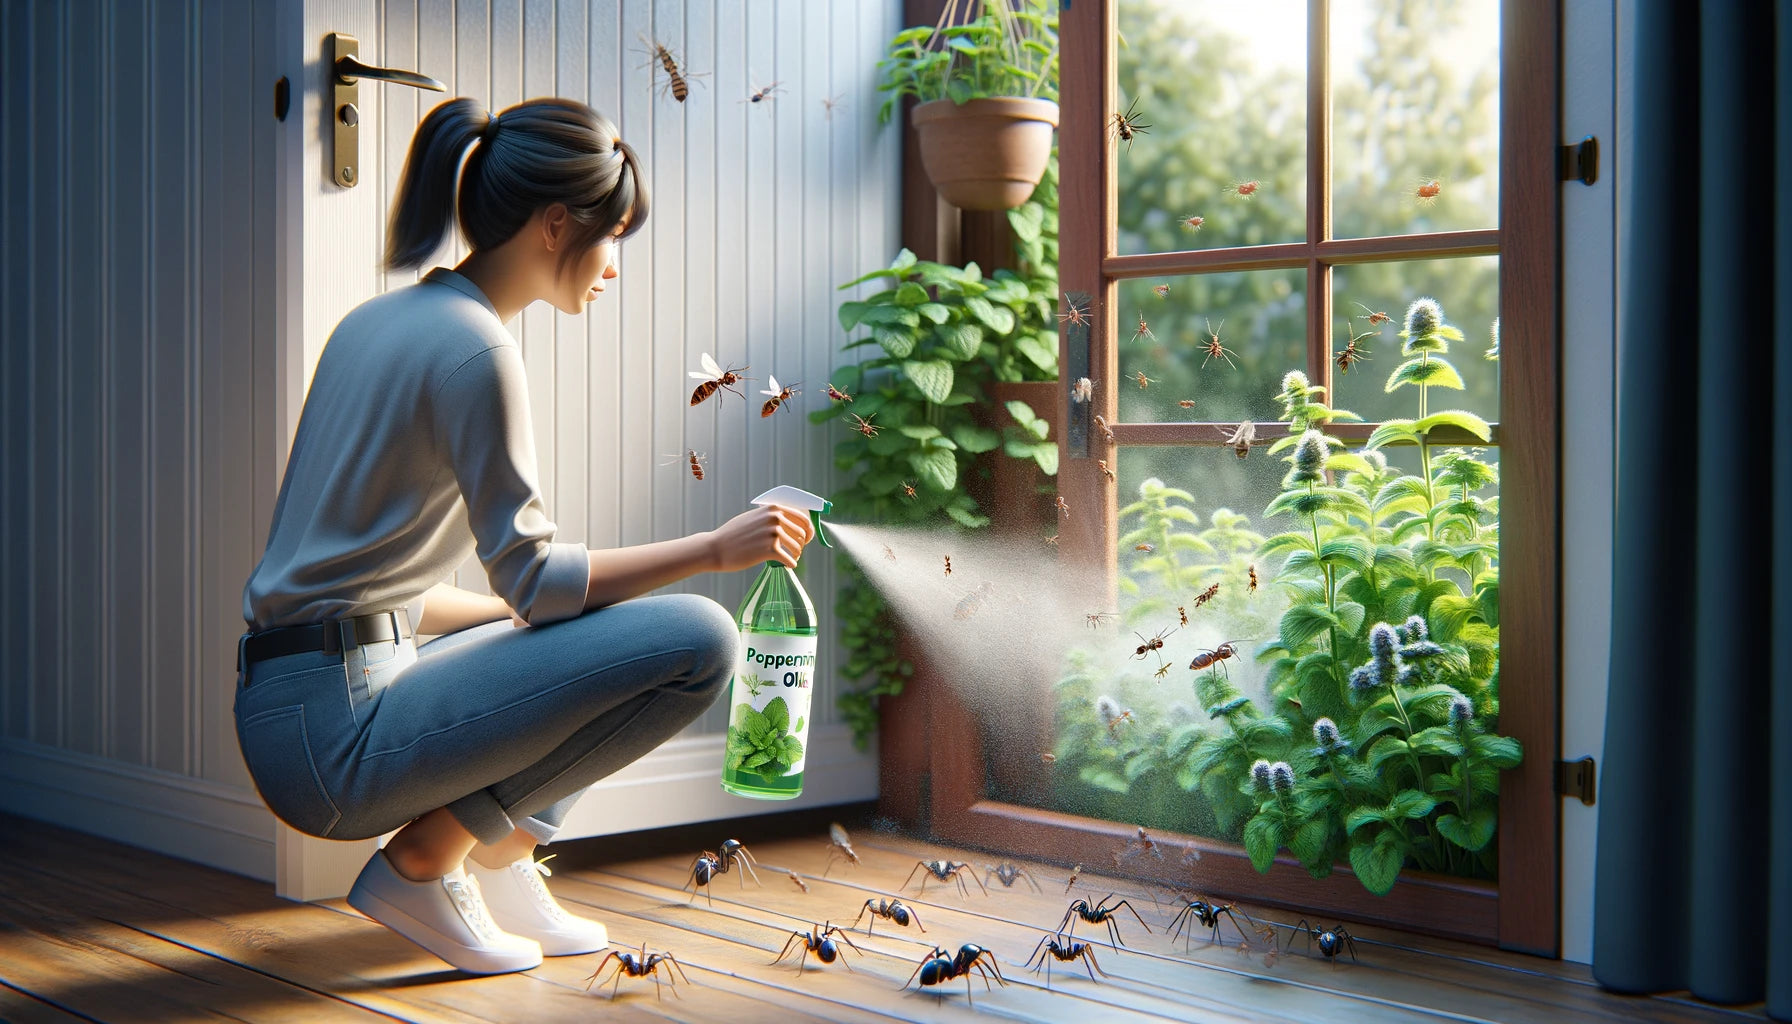 Does Peppermint Oil Bug Repellent Actually Work?